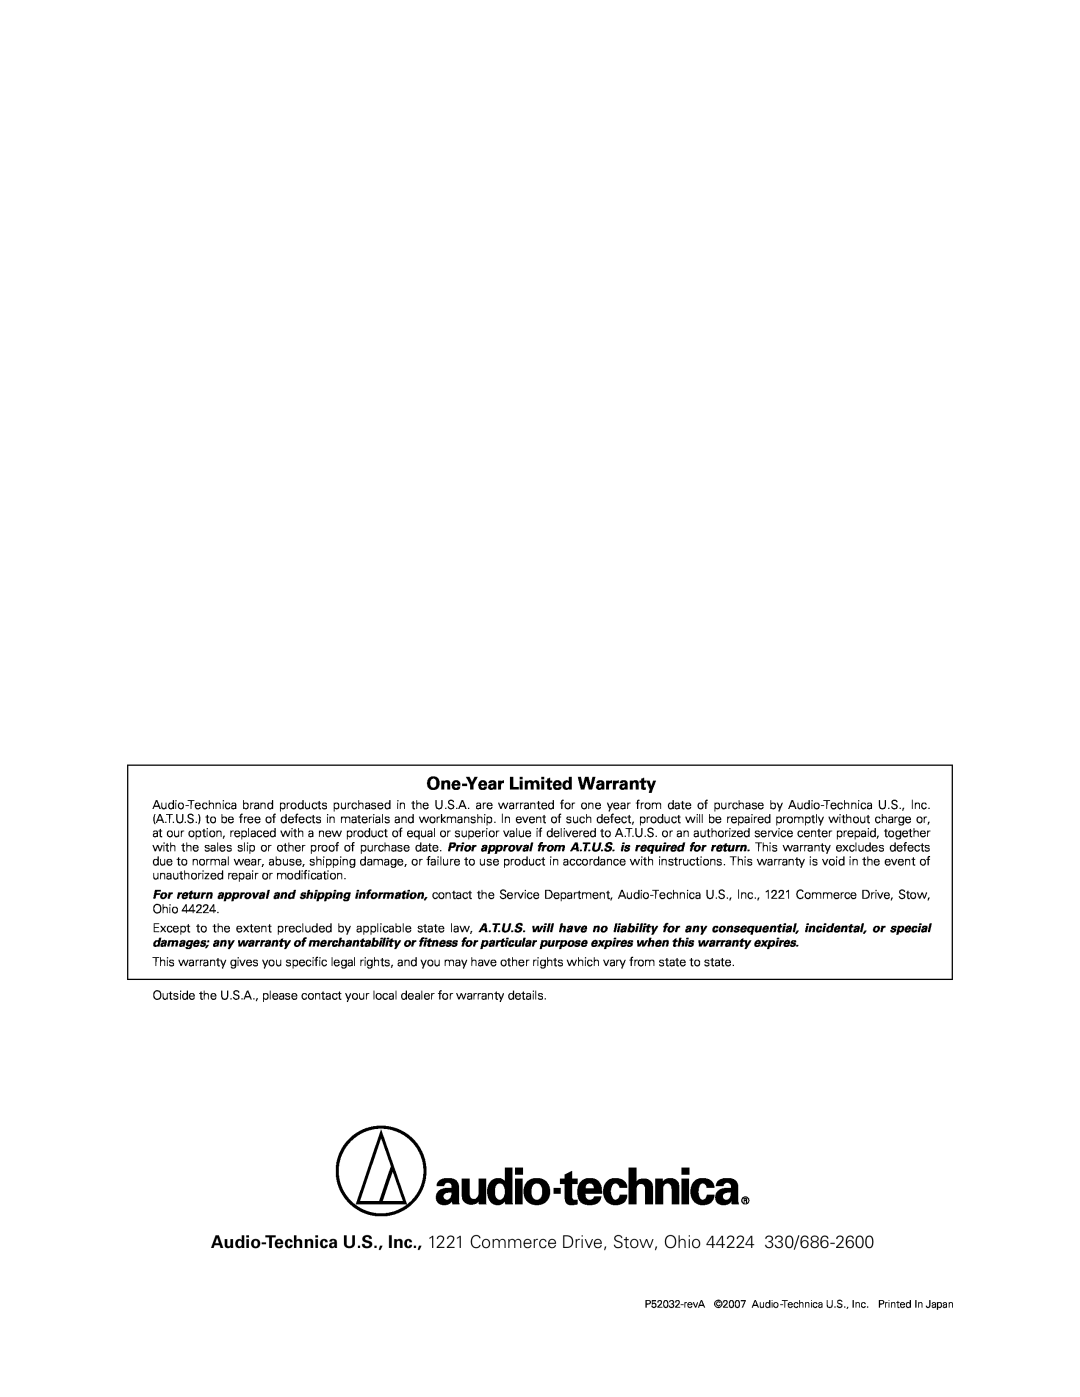 Audio-Technica AT-MX351 manual One-Year Limited Warranty, P52032-revA 2007 Audio-Technica U.S., Inc. Printed In Japan 